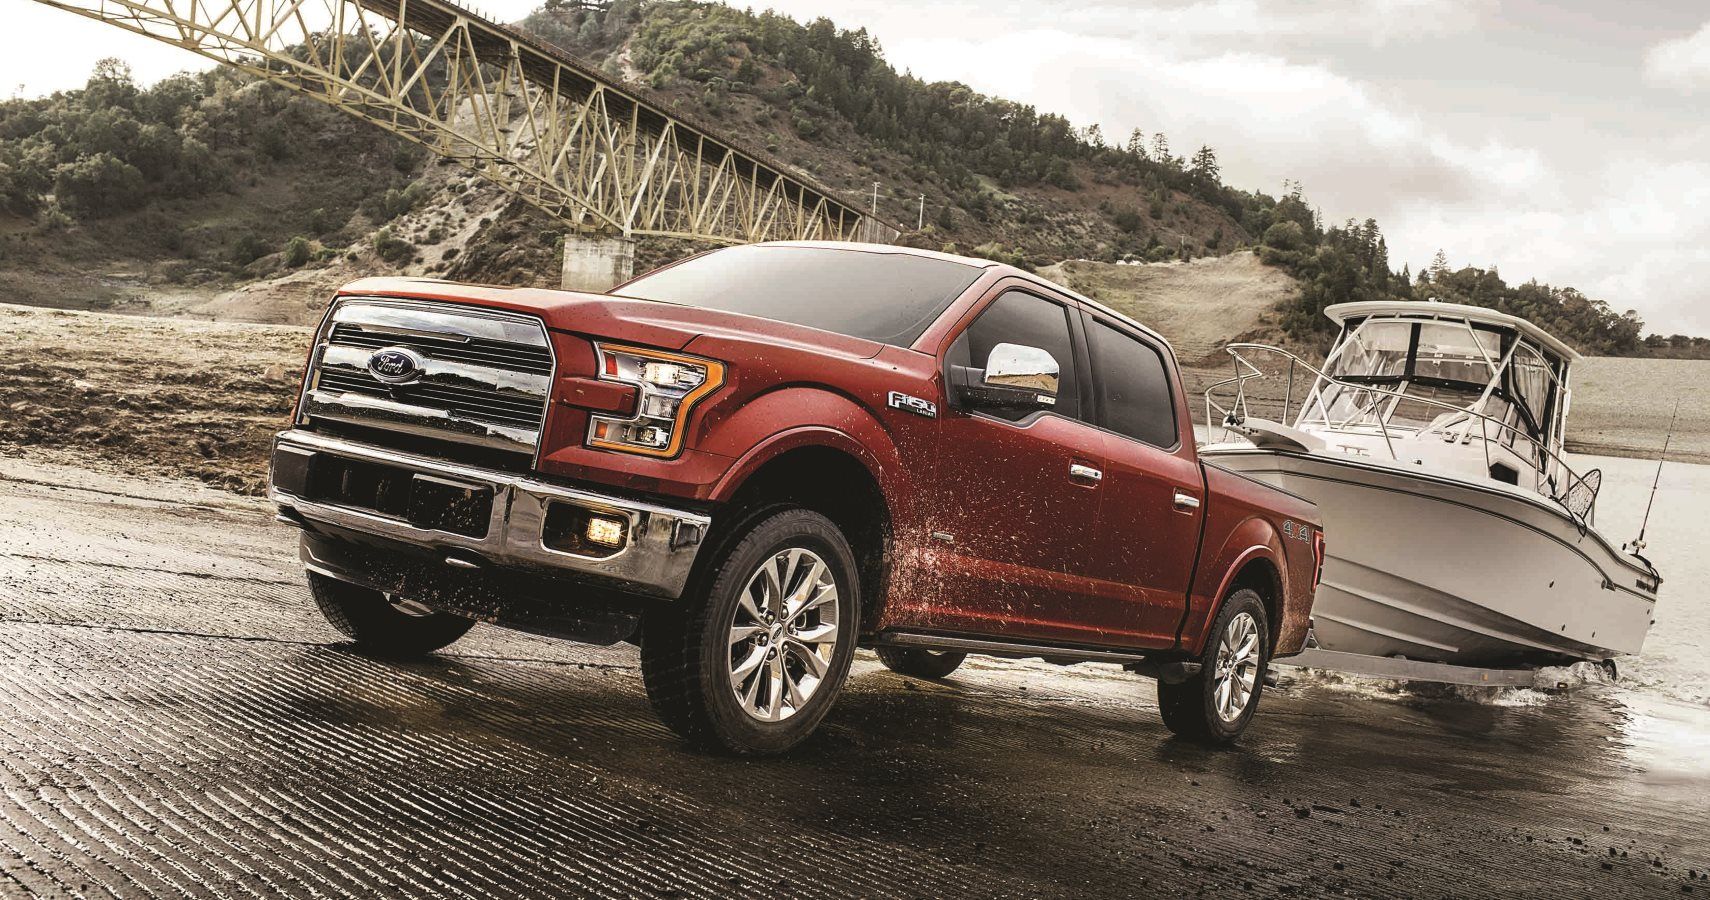 Aluminum-Bodied Ford F-150 No More Expensive To Repair Than Previous Steel Body